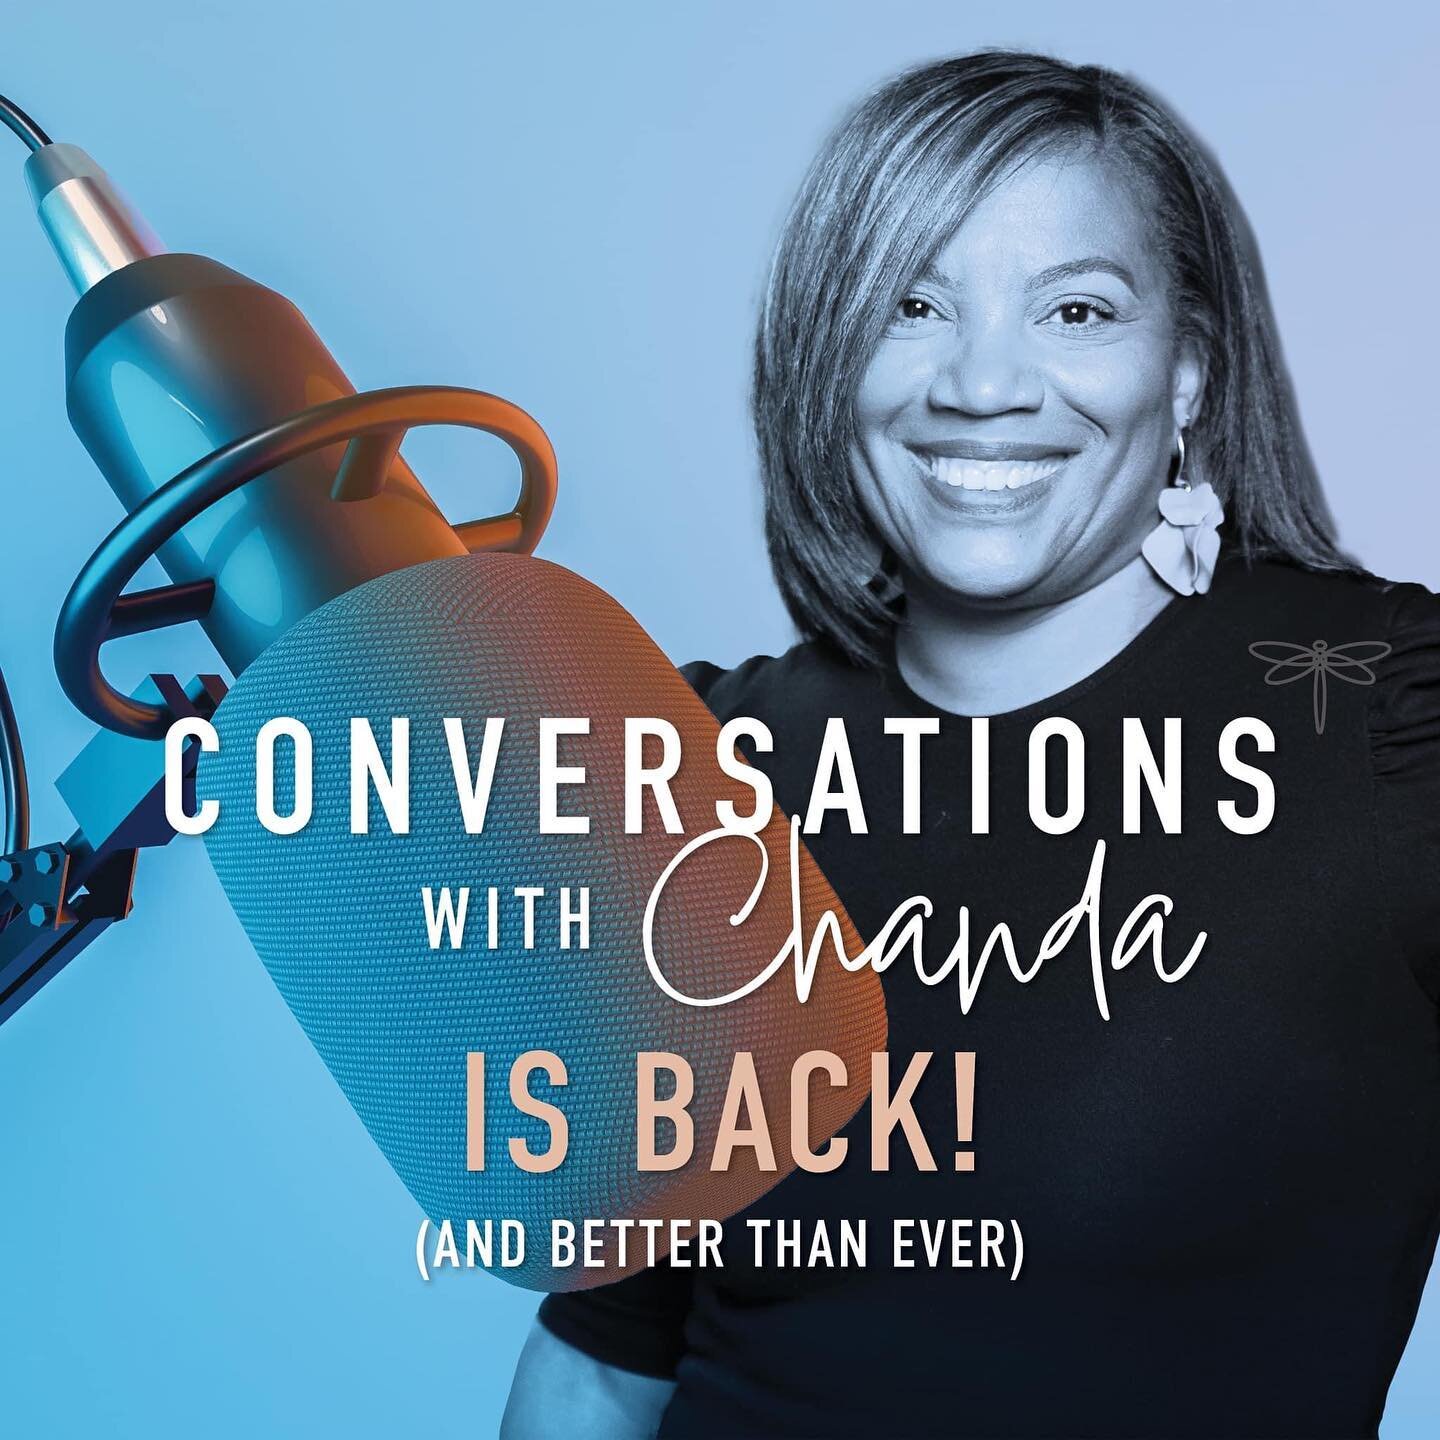 We started Red Mood Marketing with a simple idea&hellip;to do IncREDible Work with IncREDible people. We are thrilled to work with the formidable, delightful and inspirational Chanda Smith Baker. Today she re-launches her brilliant podcast, Conversat